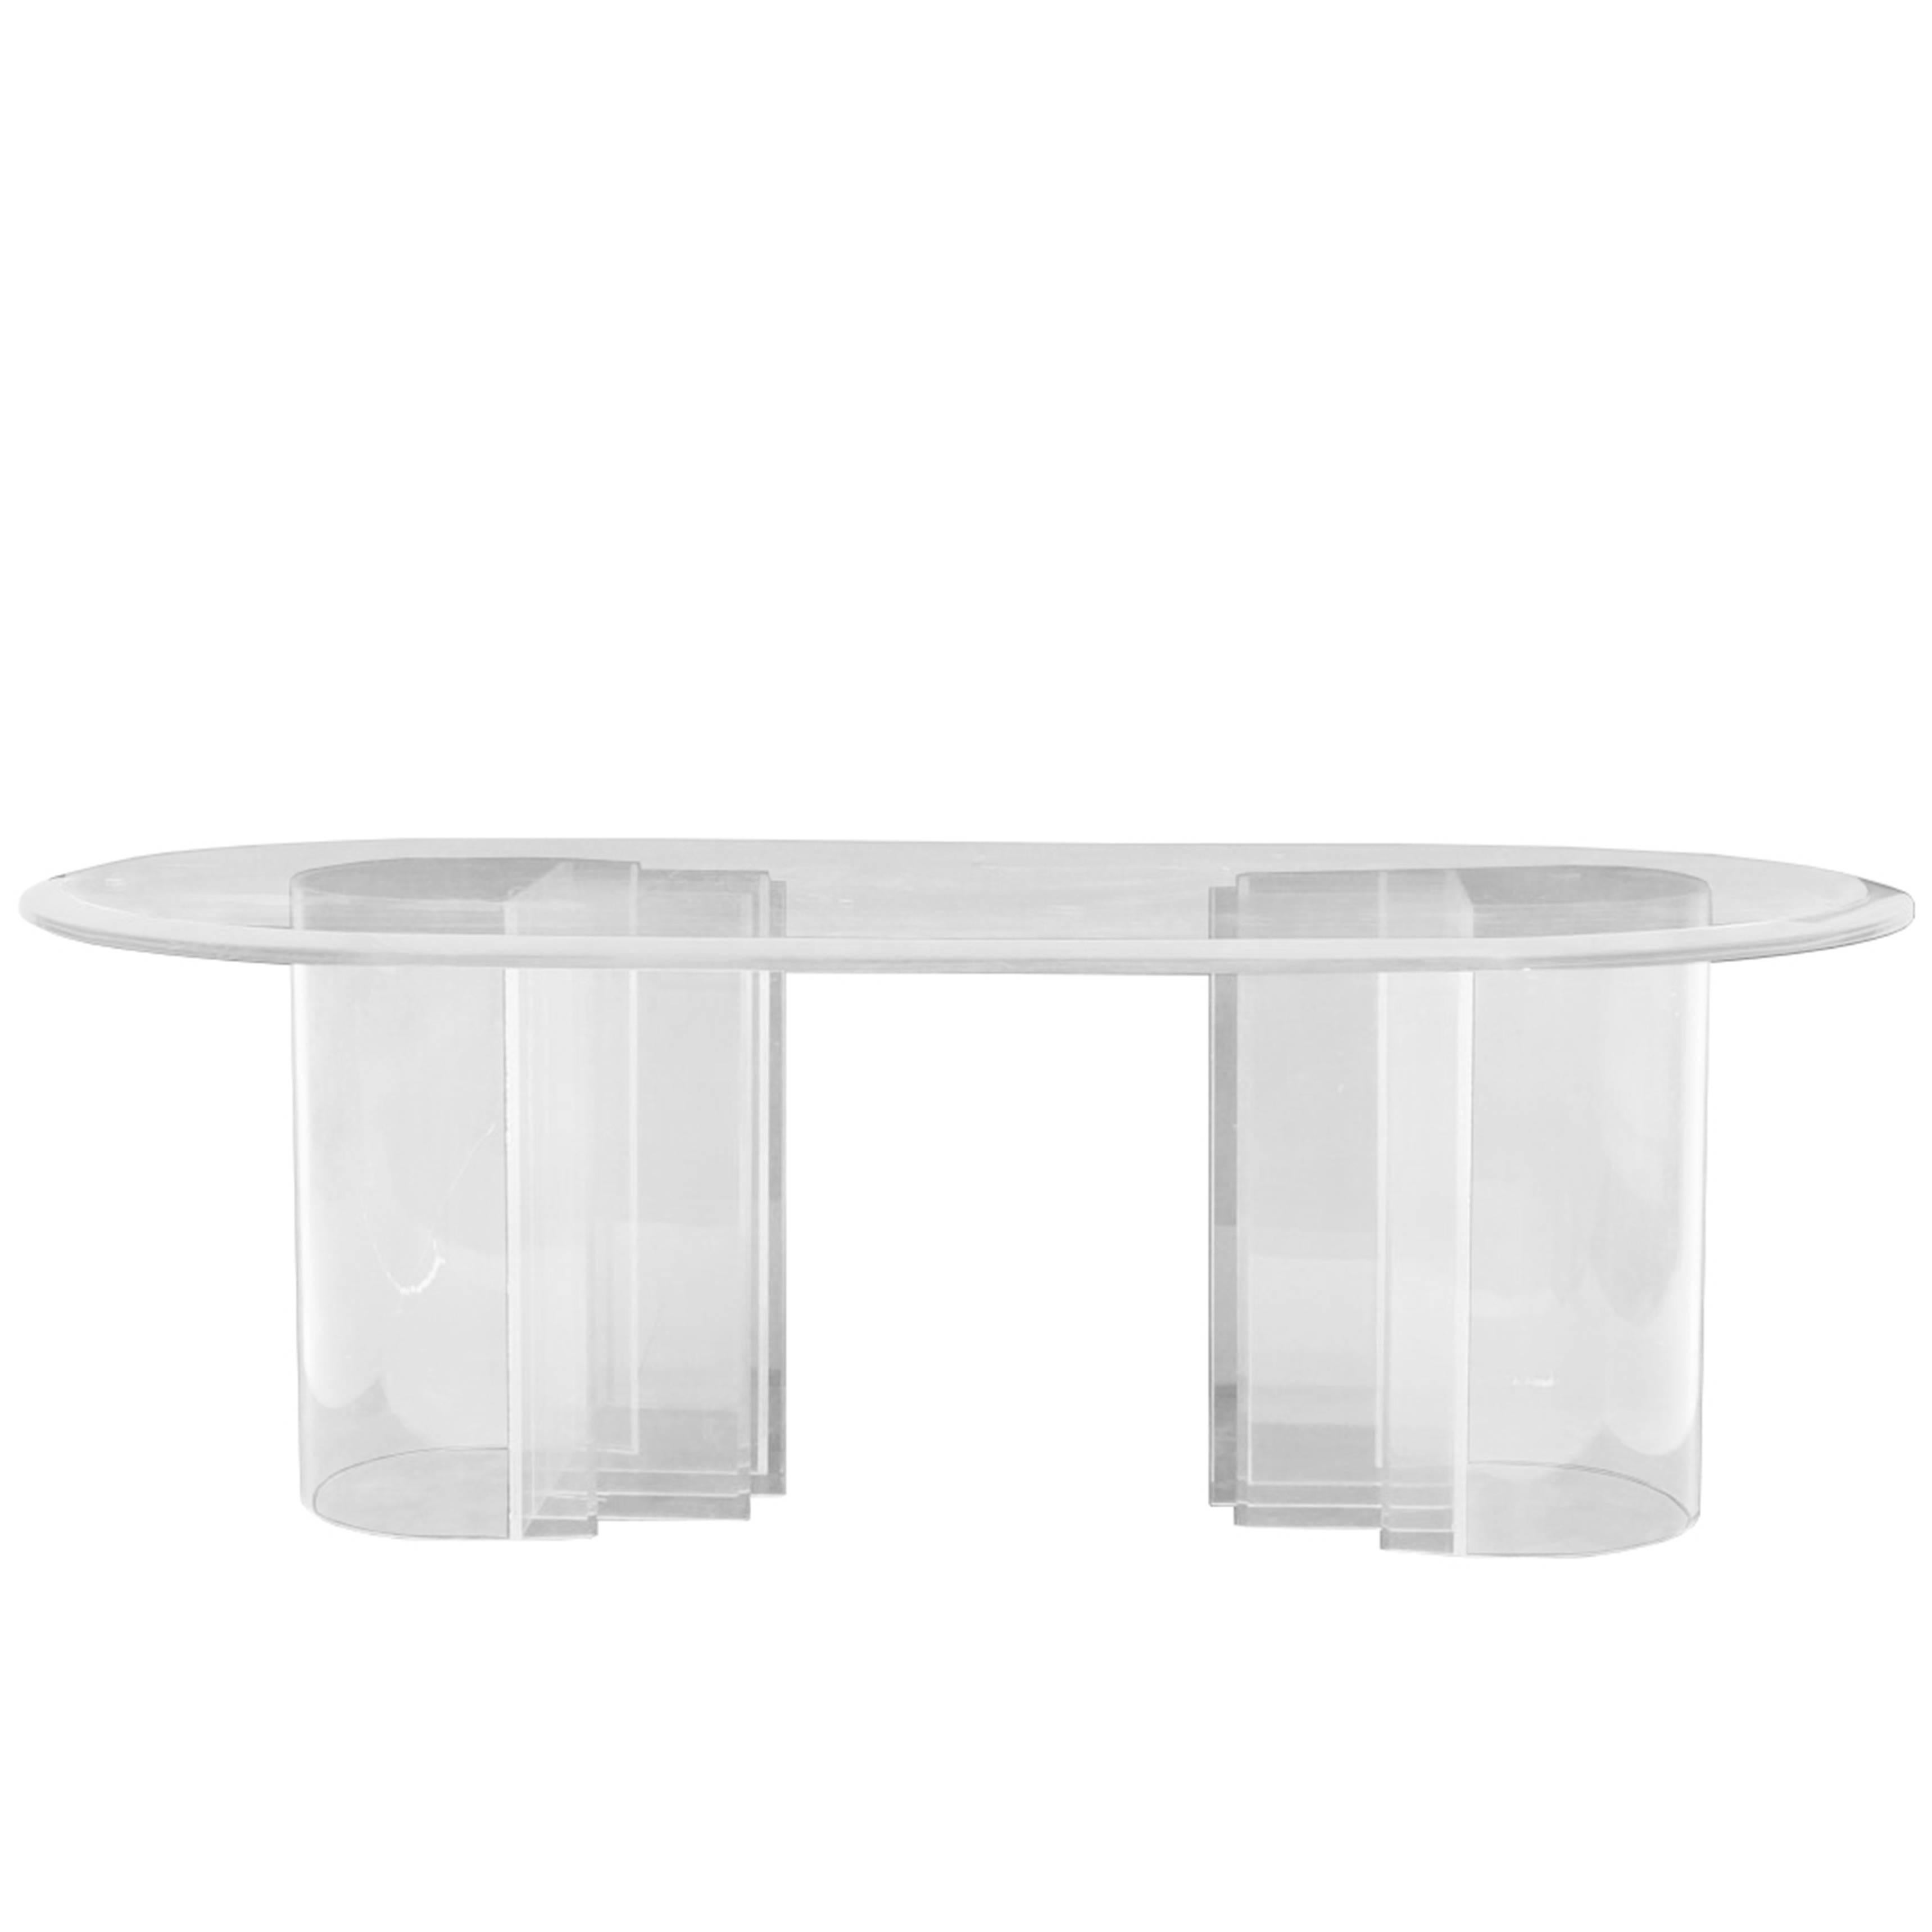 Double Pedestal Lucite Dining Table by Charles Hollis Jones, "Blade" Line